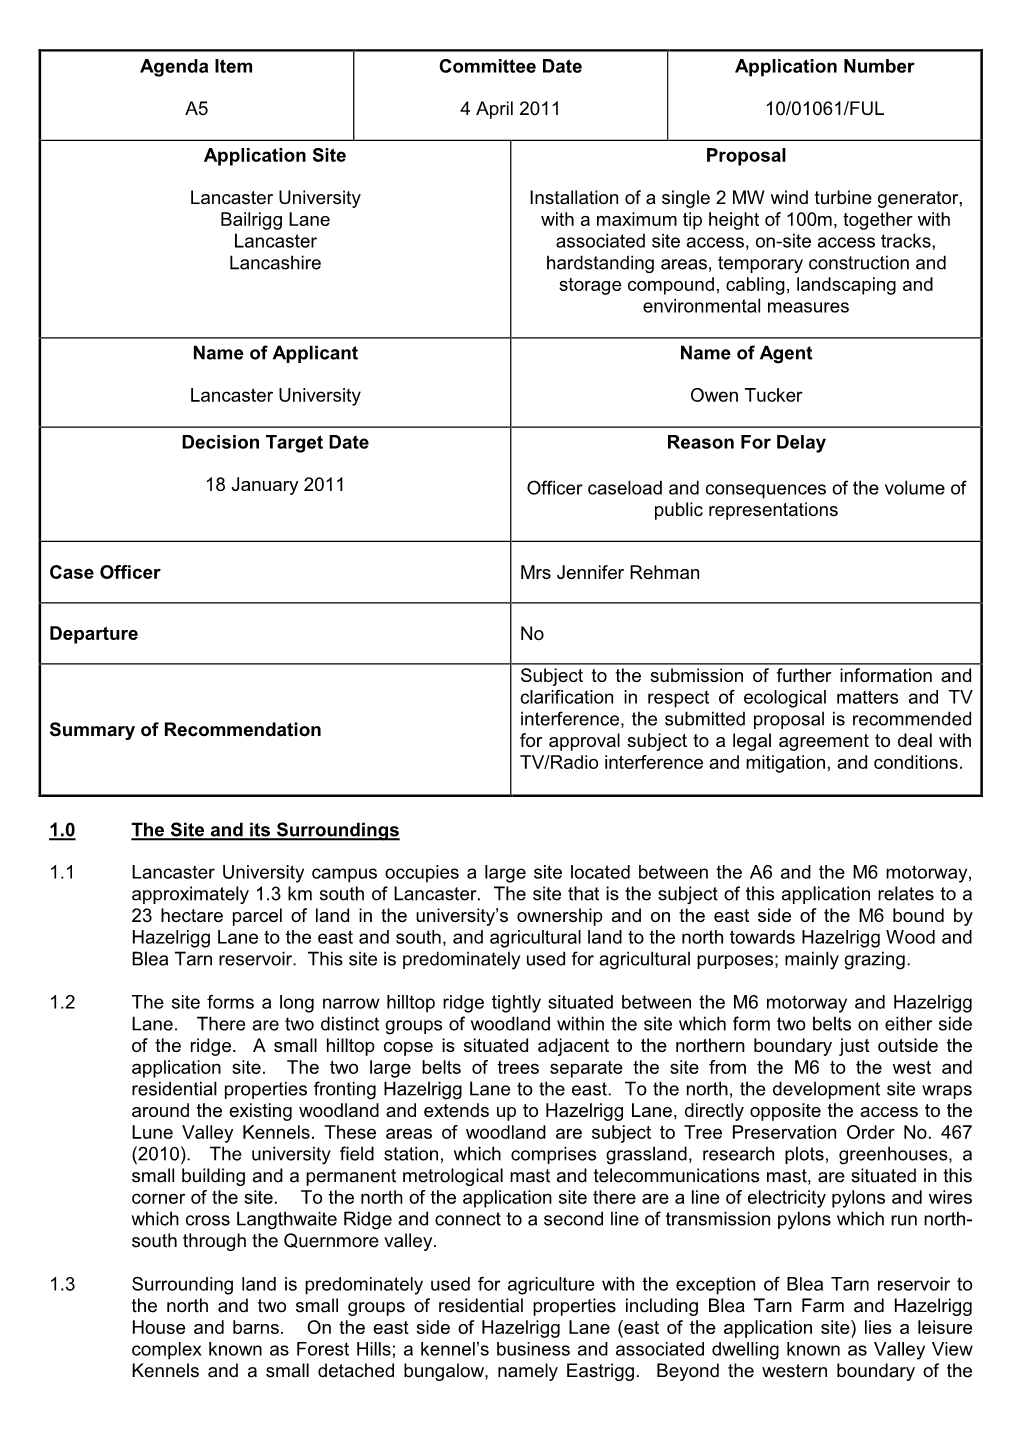 Agenda Item A5 Committee Date 4 April 2011 Application Number 10